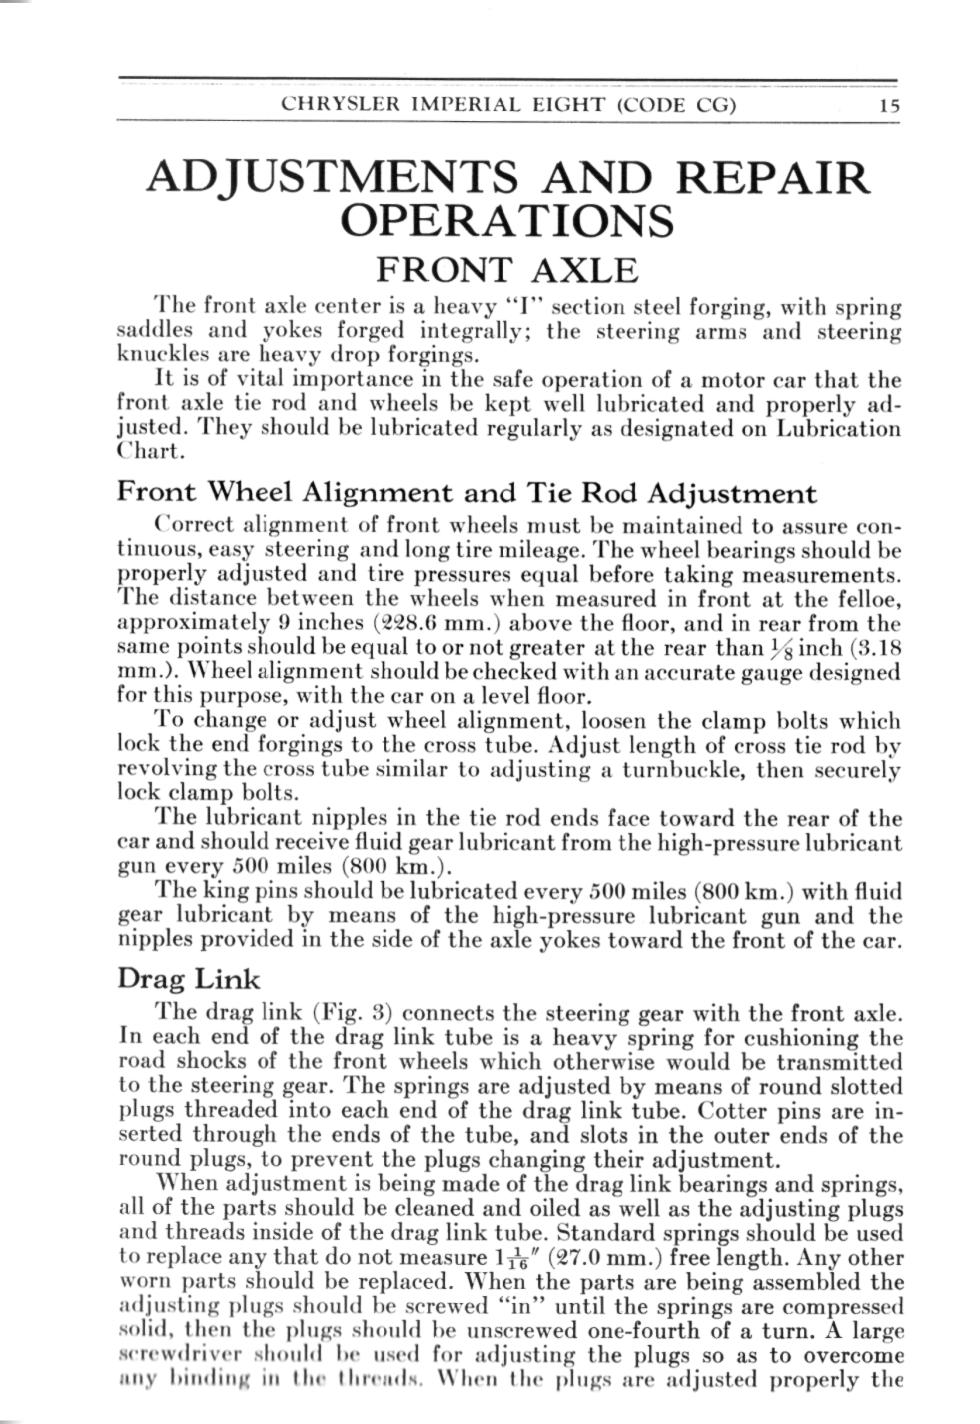 1931 Chrysler Imperial Owners Manual Page 63